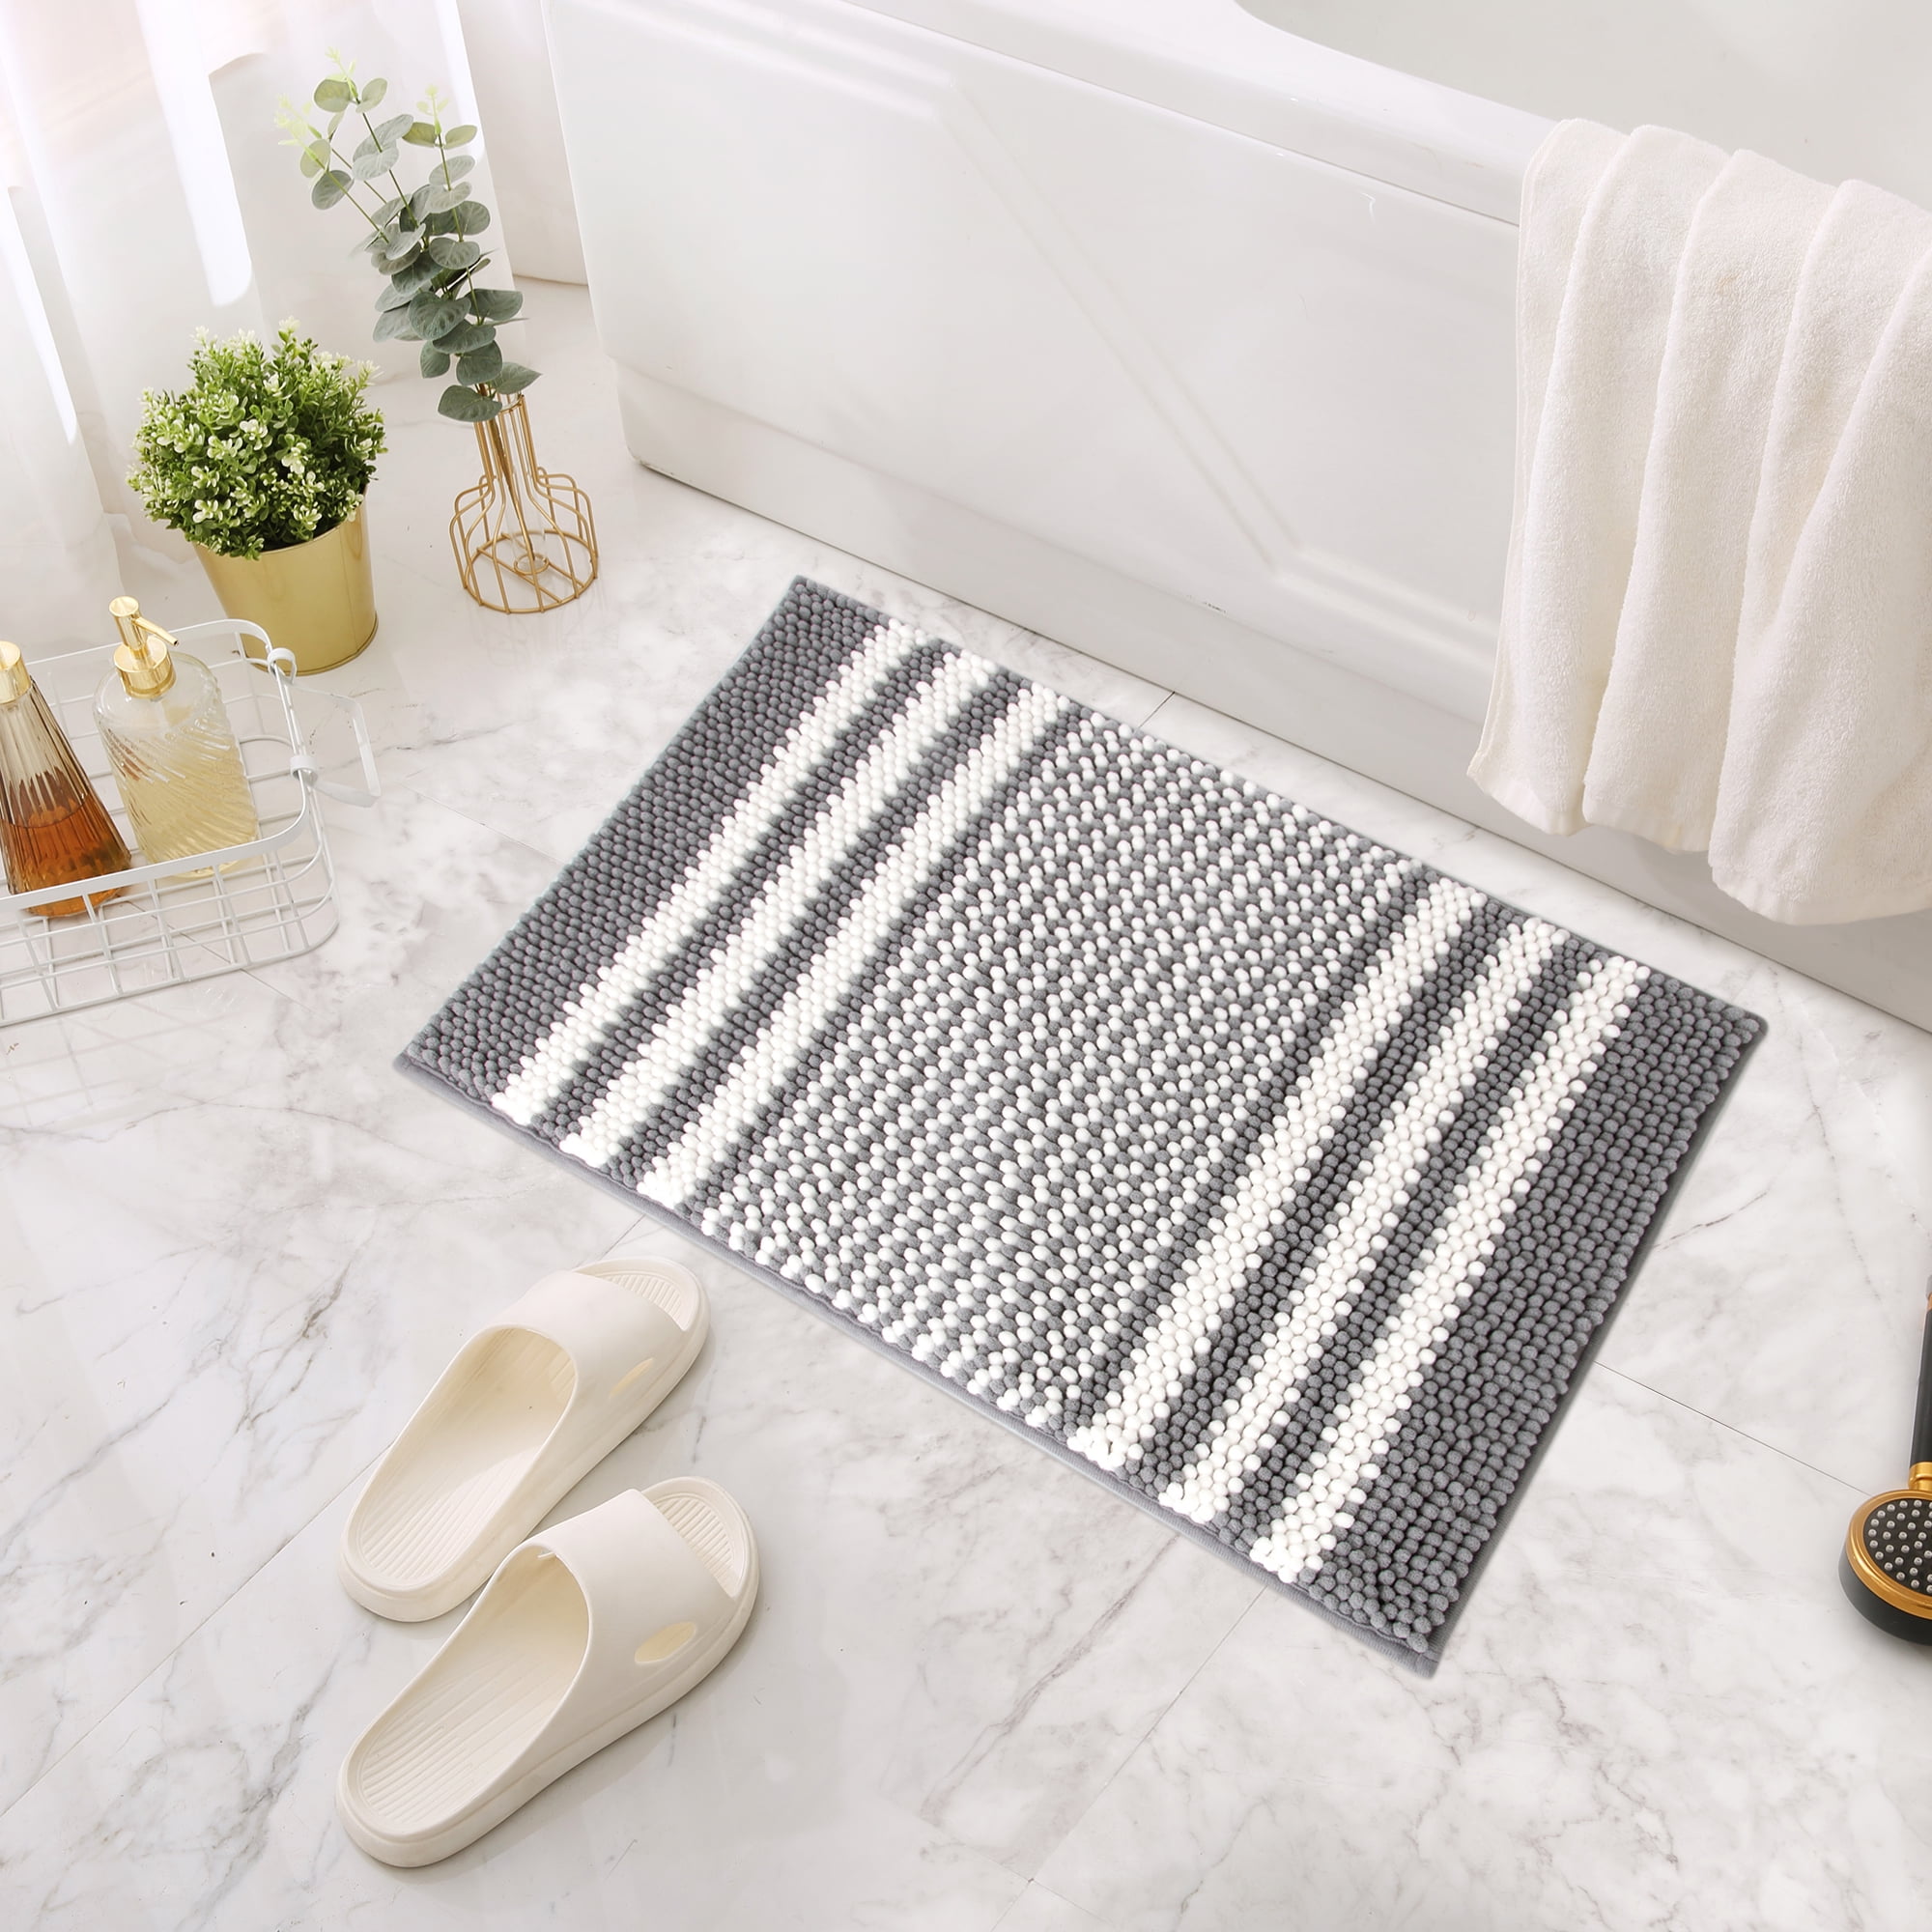  Color G Chenille Bath Mats for Bathroom, 24x43 Soft Rugs for  Bathroom Floor, Quick Dry, Absorbent, Machine Washable, Non Slip Bathroom  Rugs for Sink, Tub, Shower, Silver Grey : Home 